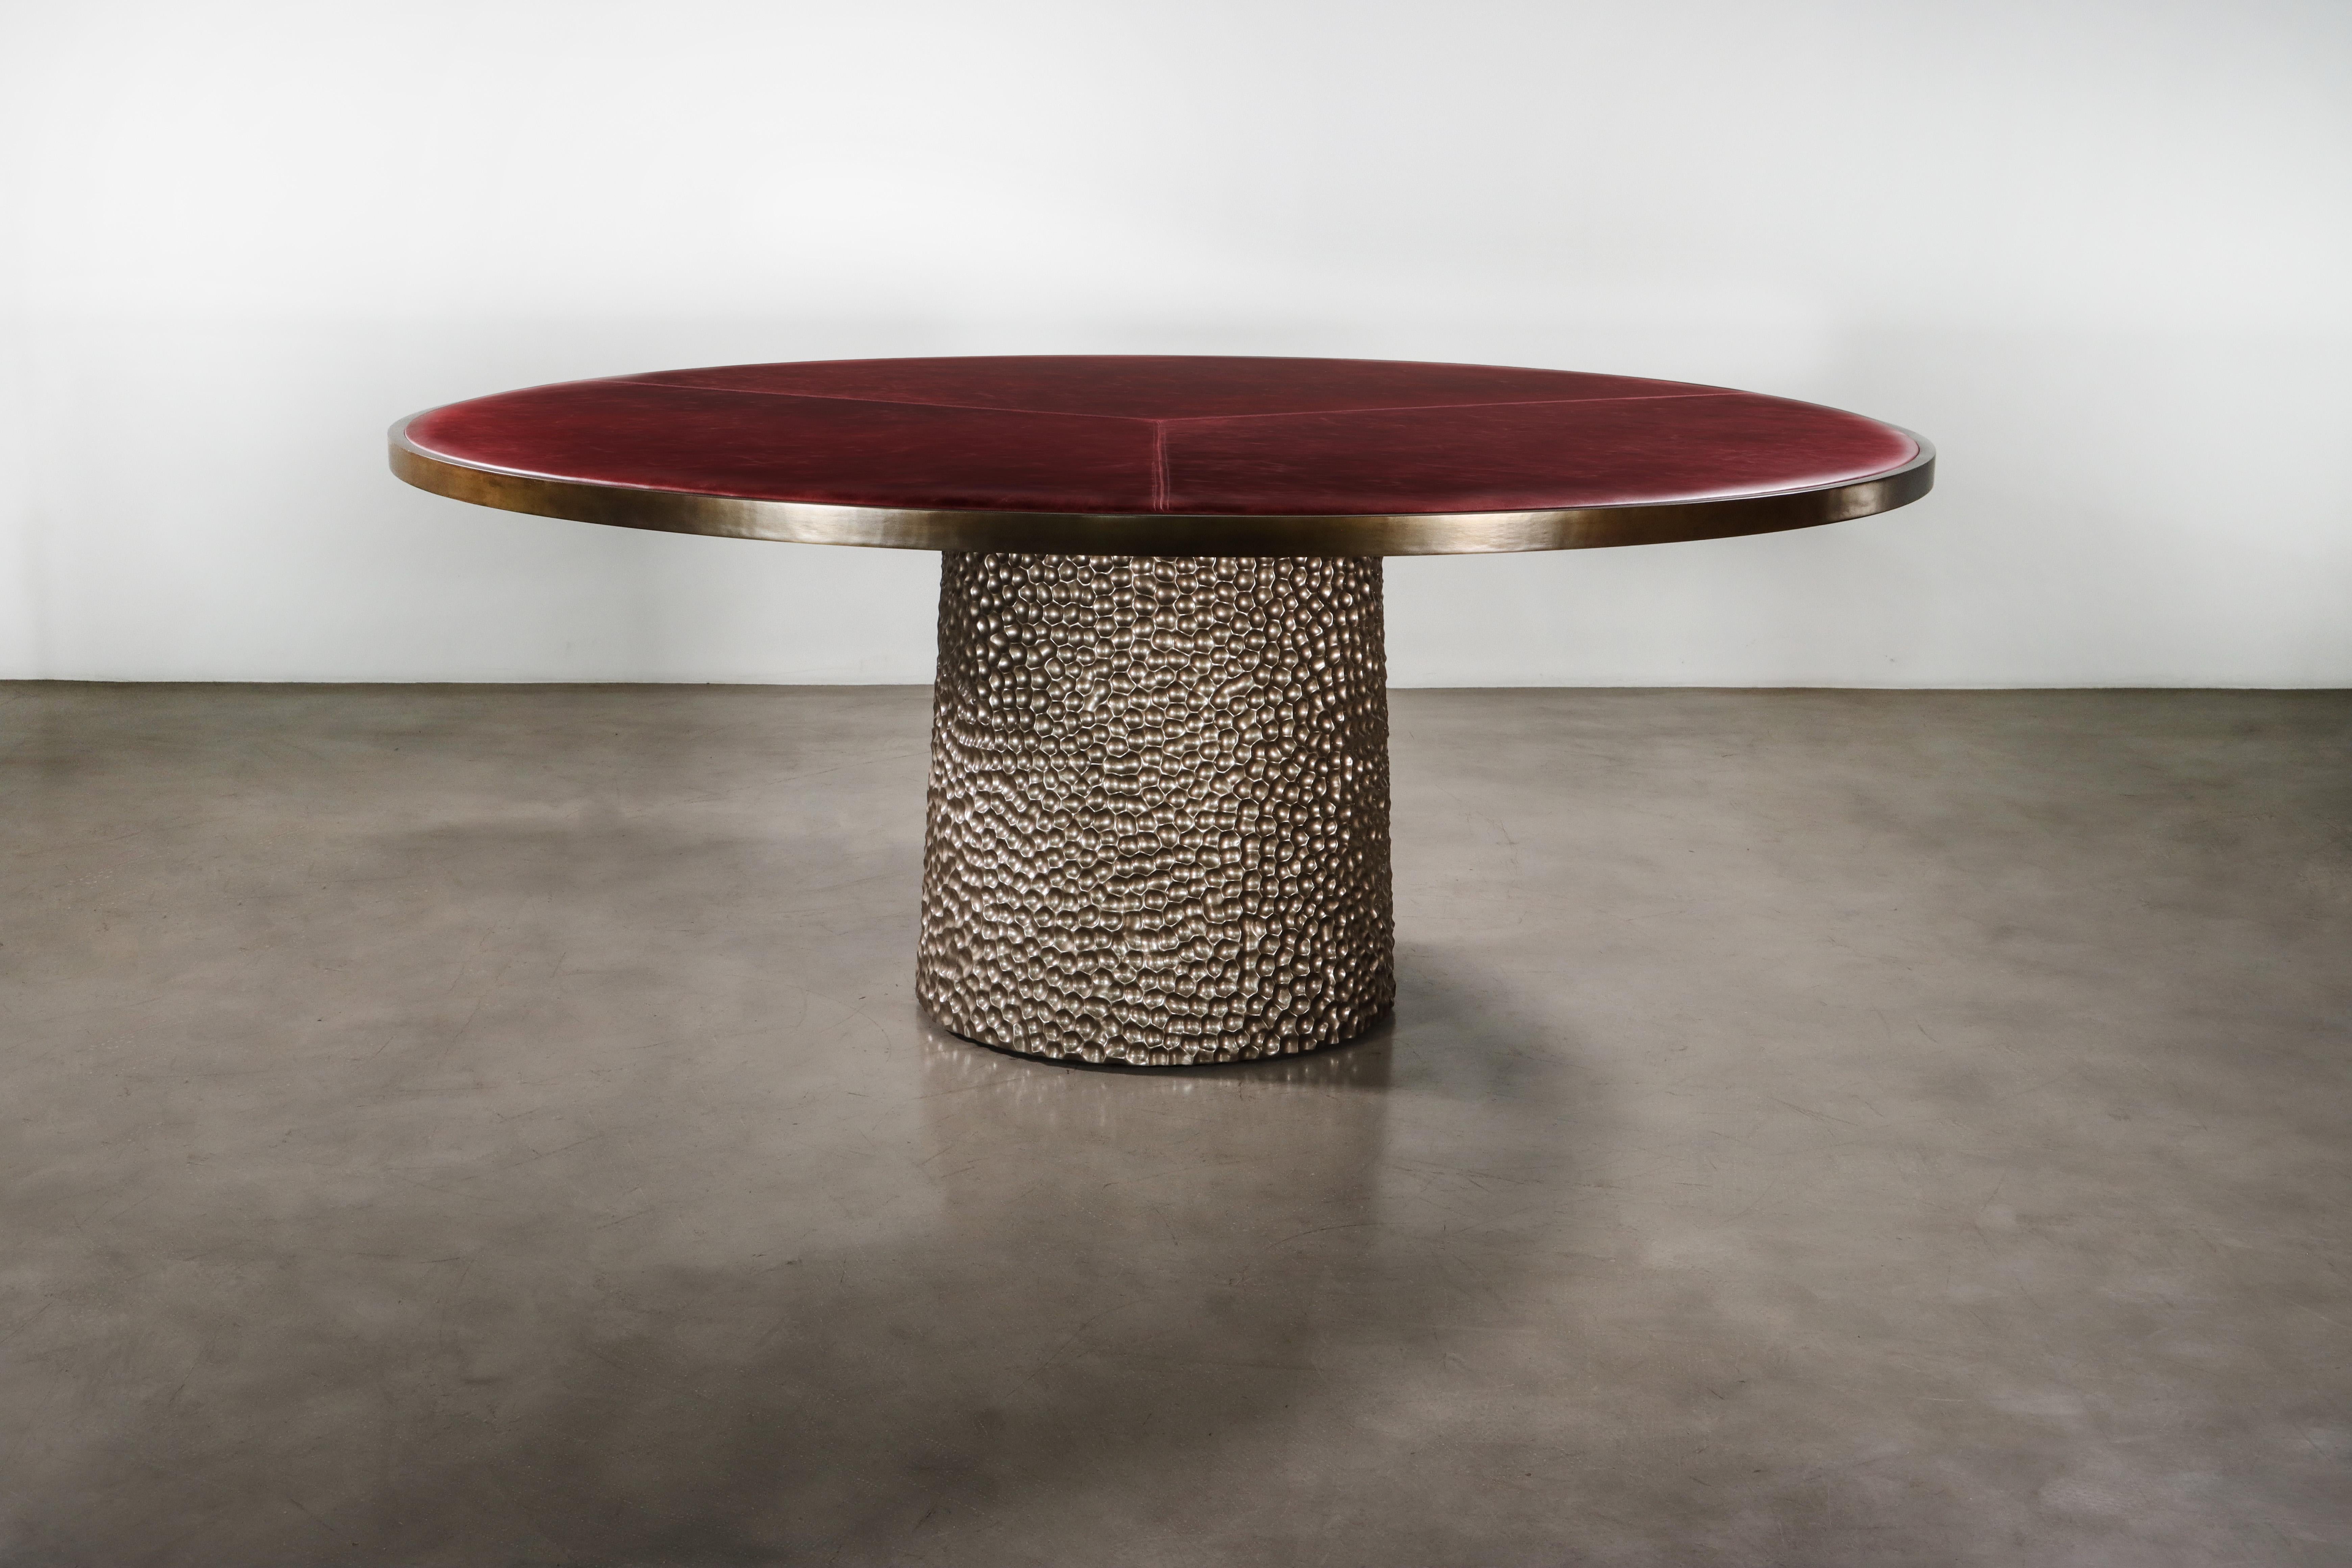 The Giada Table features an upholstered top in the fabric or leather of your choice with an elegant bronze trim and a hand carved wood base shown here in a metallic finish.  

Measurements are 72